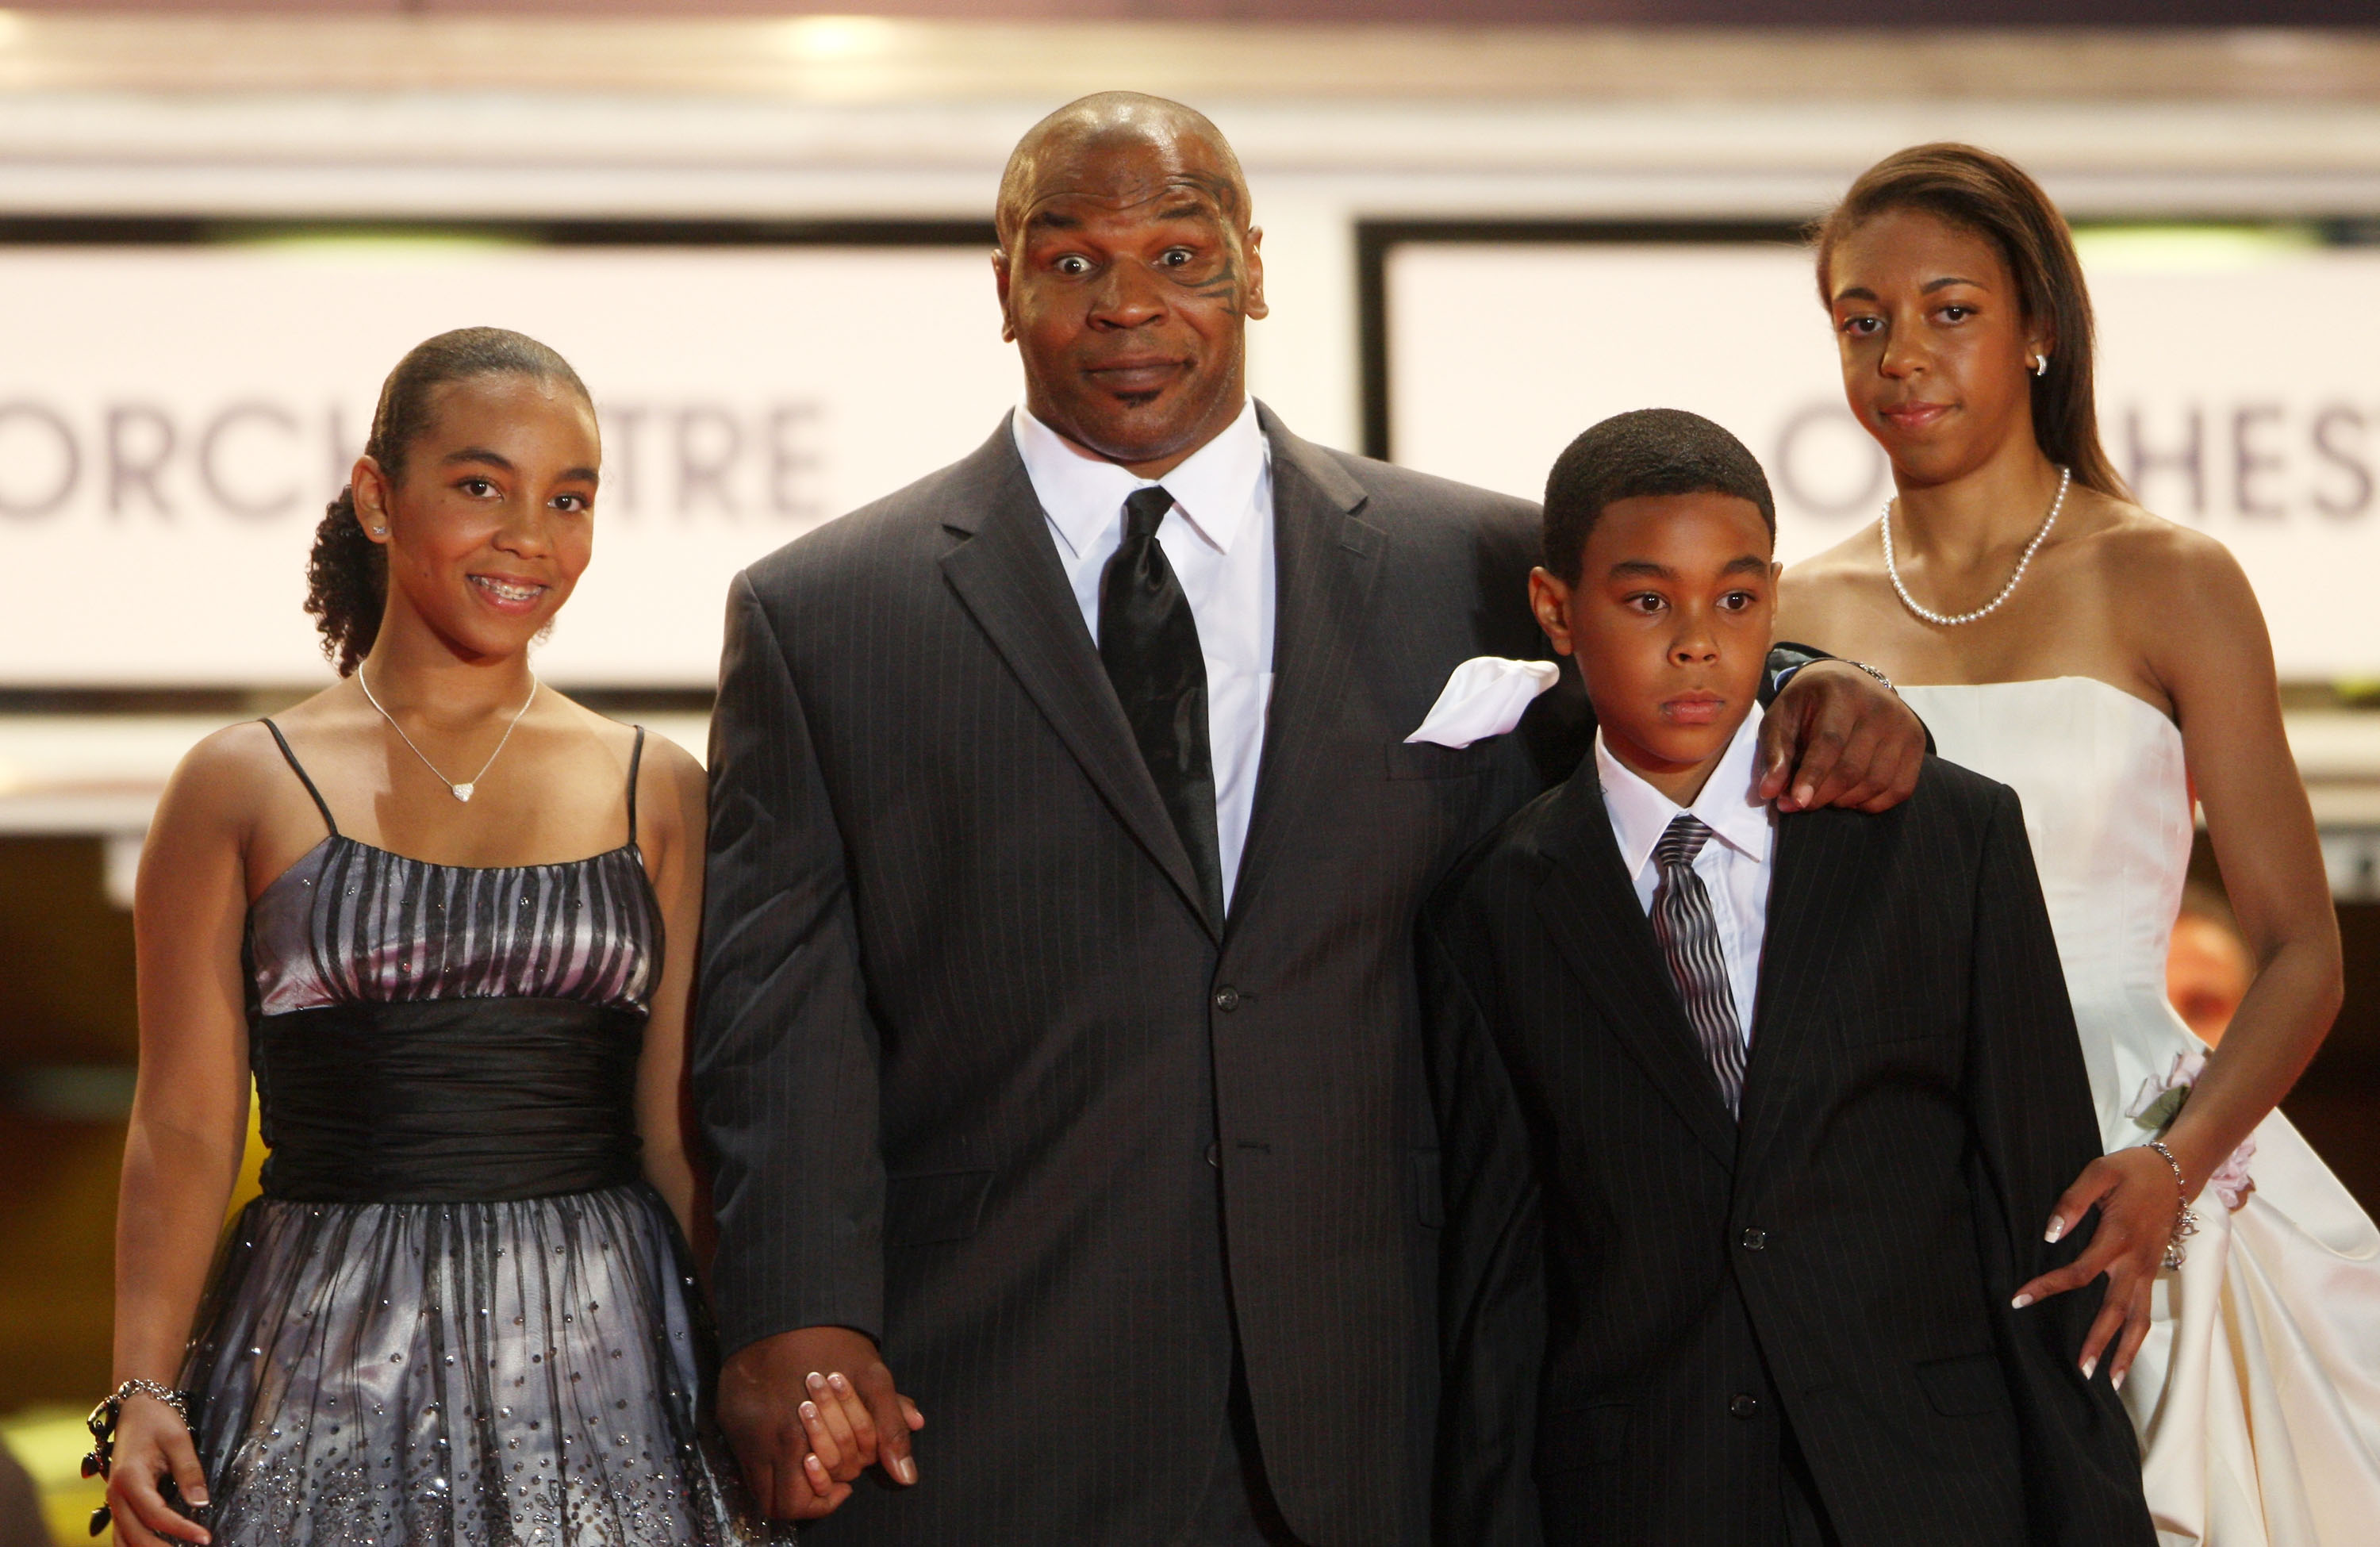 Former boxer Mike Tyson nd his family at the 'Tyson' premiere, held at the Palais des Festivals during the 61st International Cannes Film Festival on May 16, 2008, in Cannes, France | Source: Getty Images